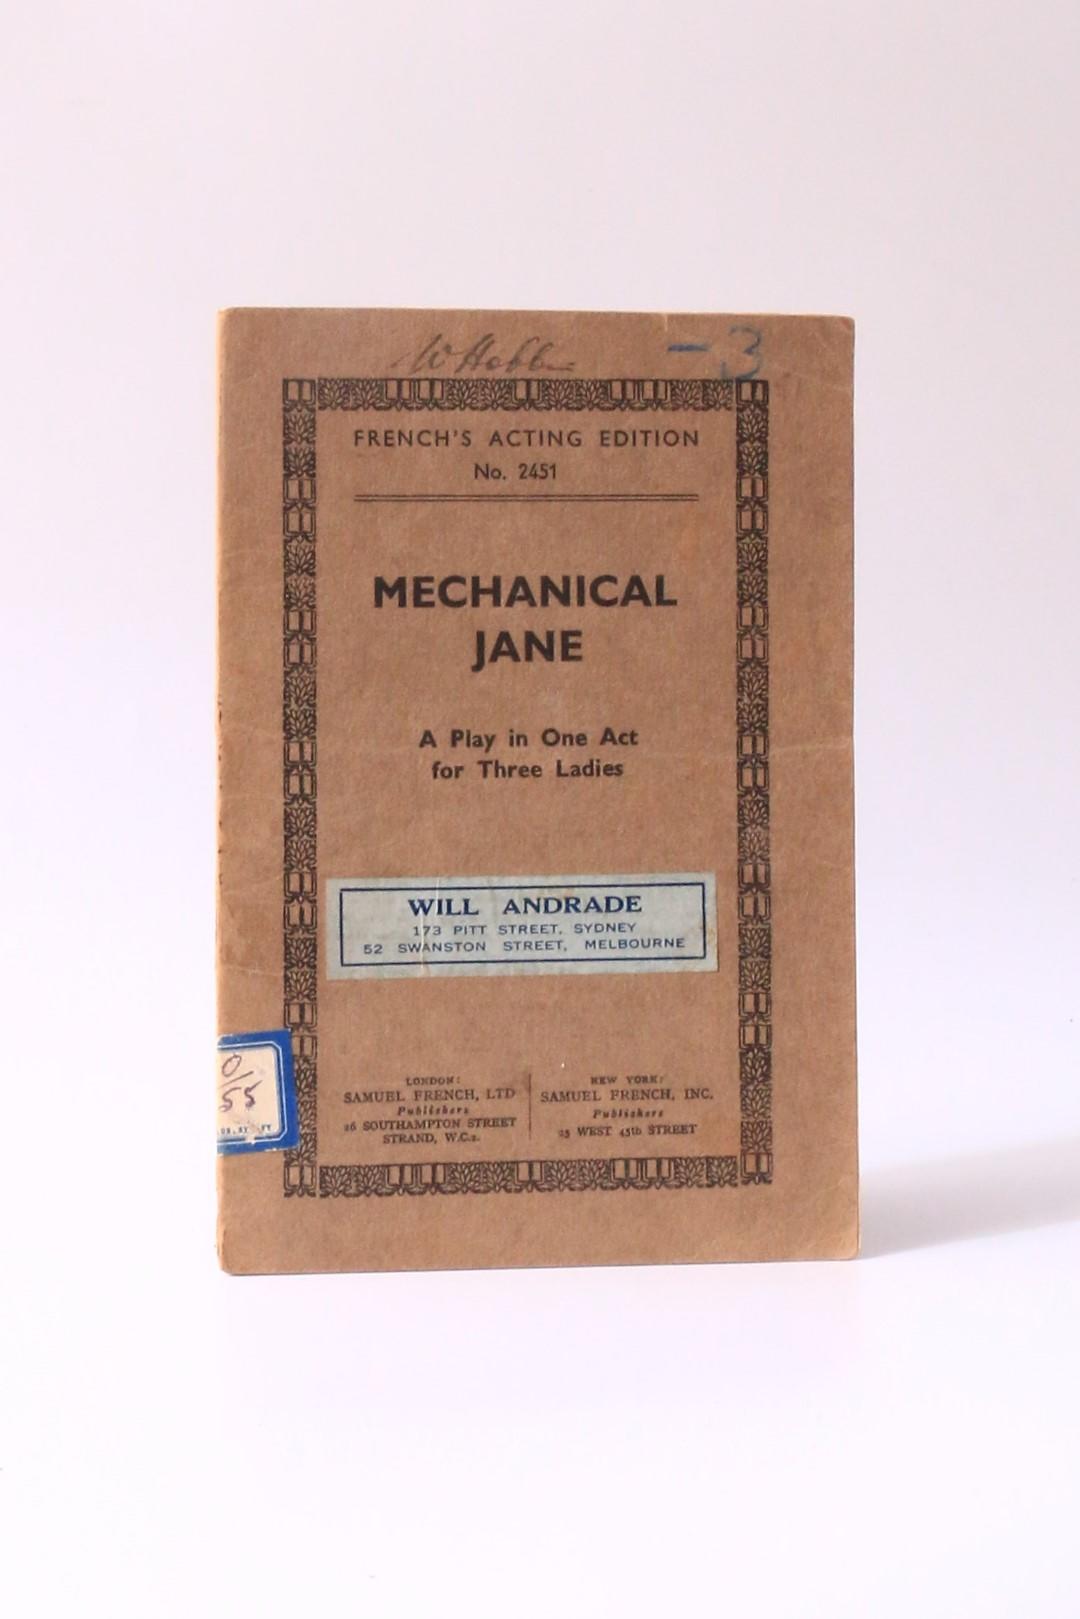 Anonymous [Gertrude Jennings] - Mechanical Jane: French's Acting Edition No. 2451 - Samuel French, 1910, First Edition.